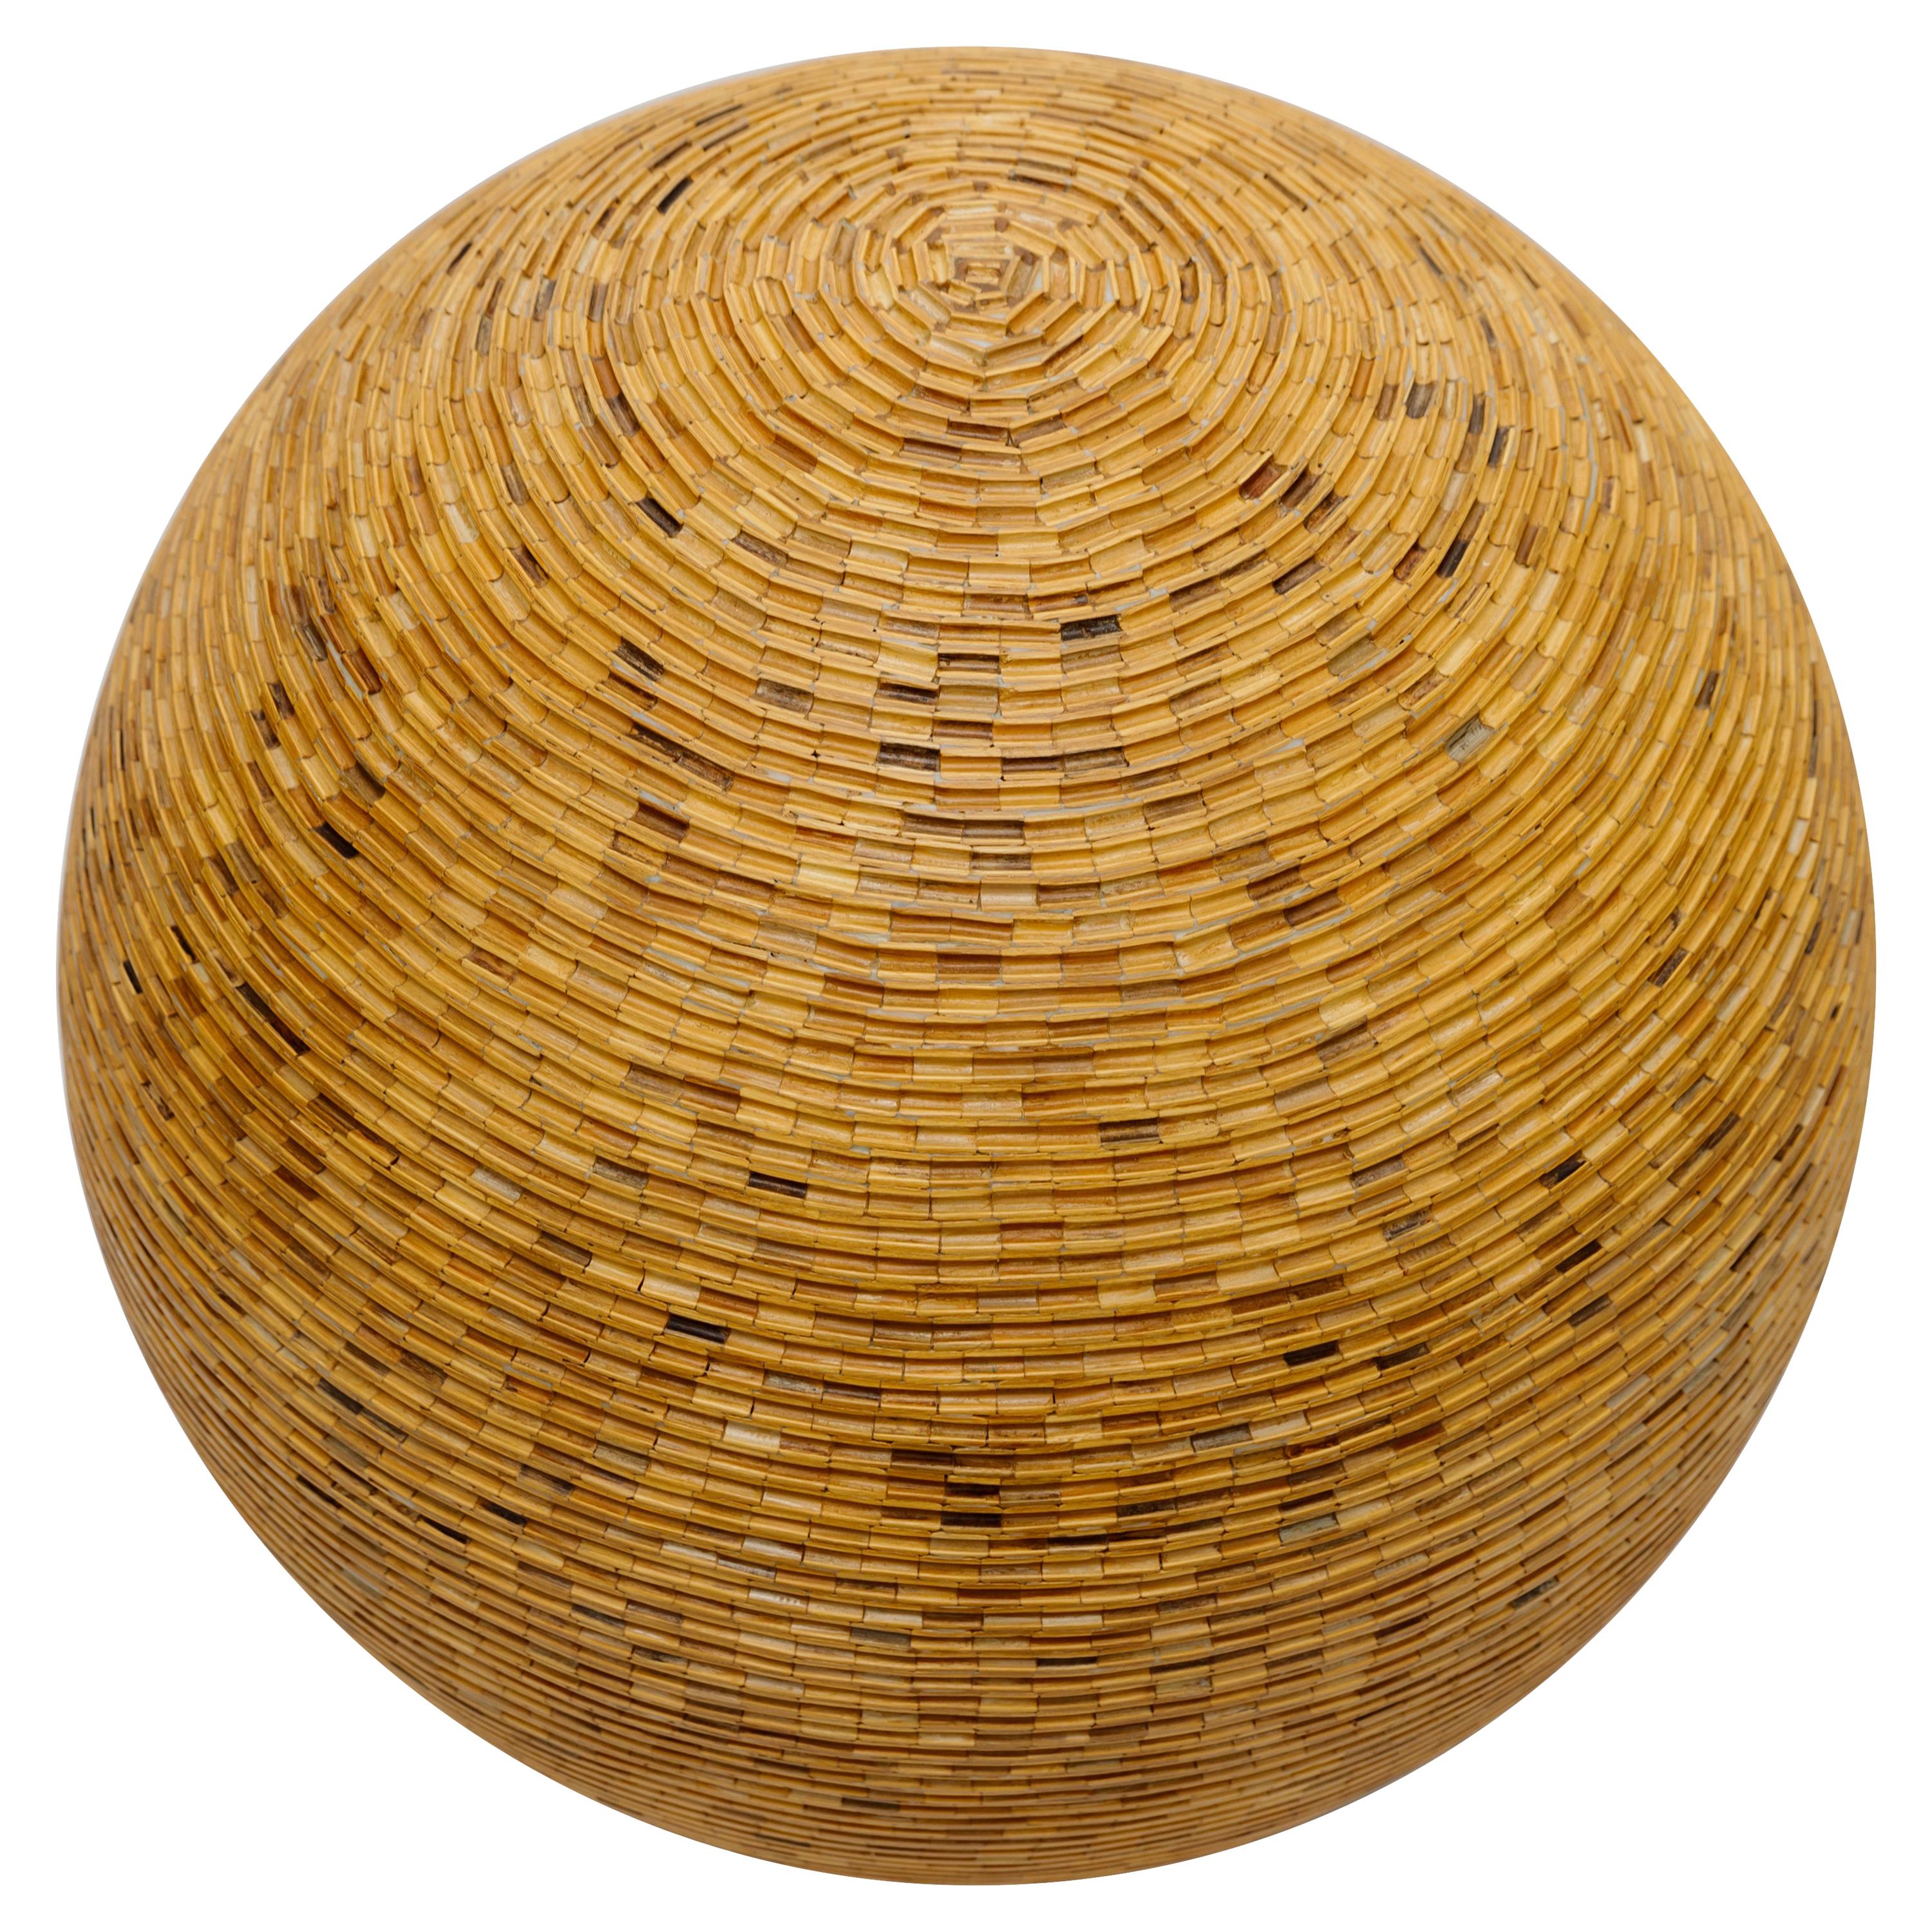 Large Sculptural Sphere Made of Wooden Pieces